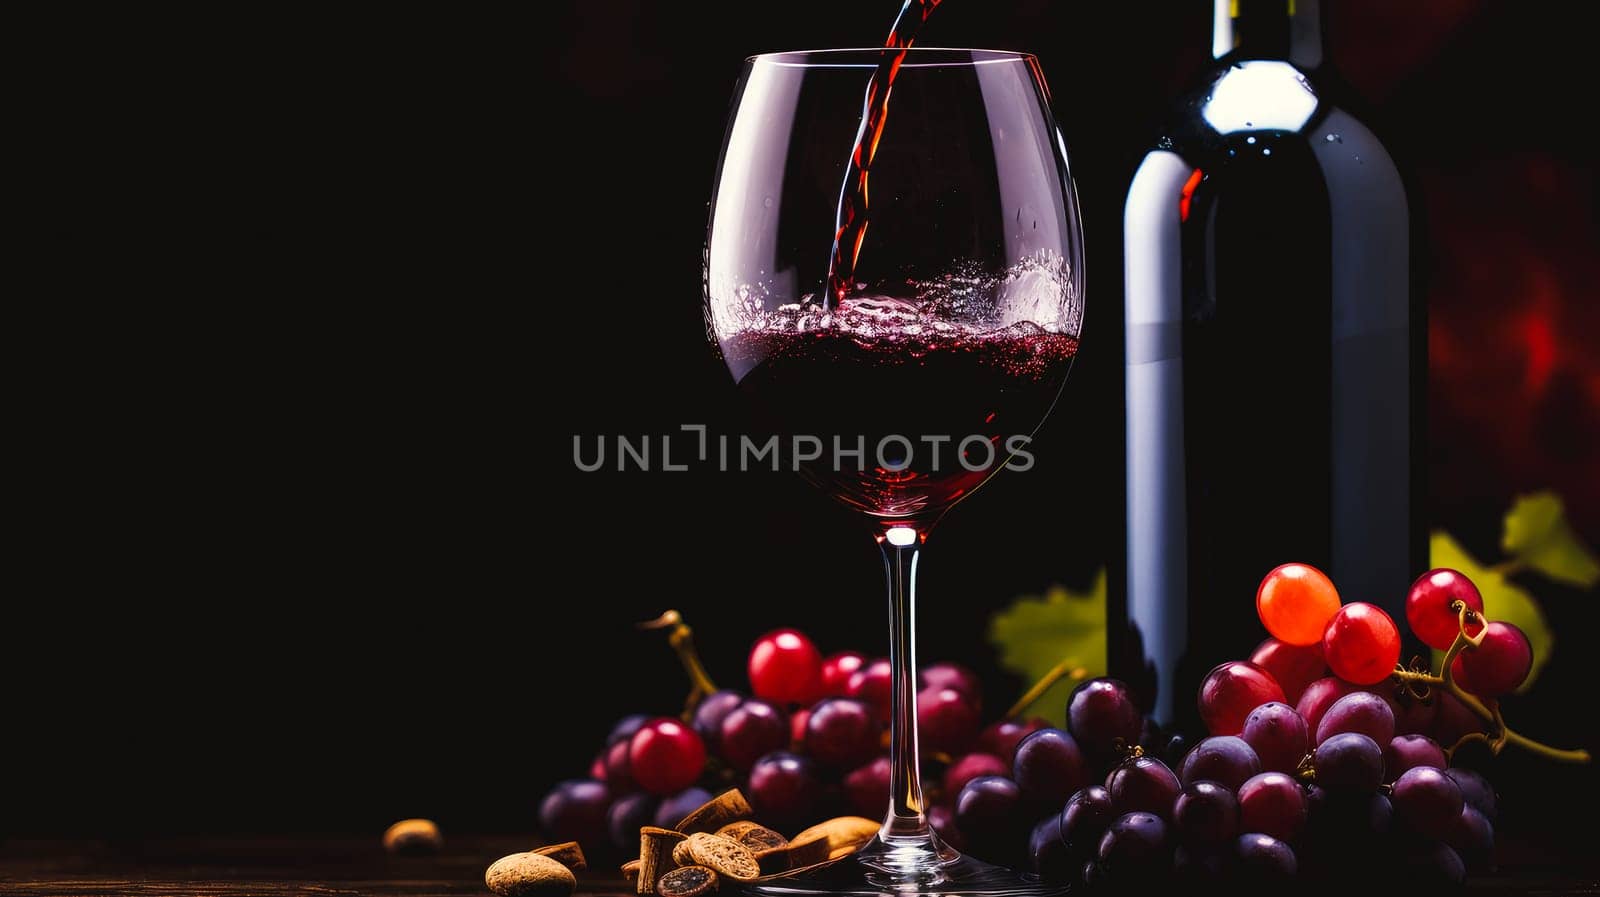 Refined still life with red wine, cheese and grapes on a wicker tray on a wooden table on a dark background. by Alla_Yurtayeva